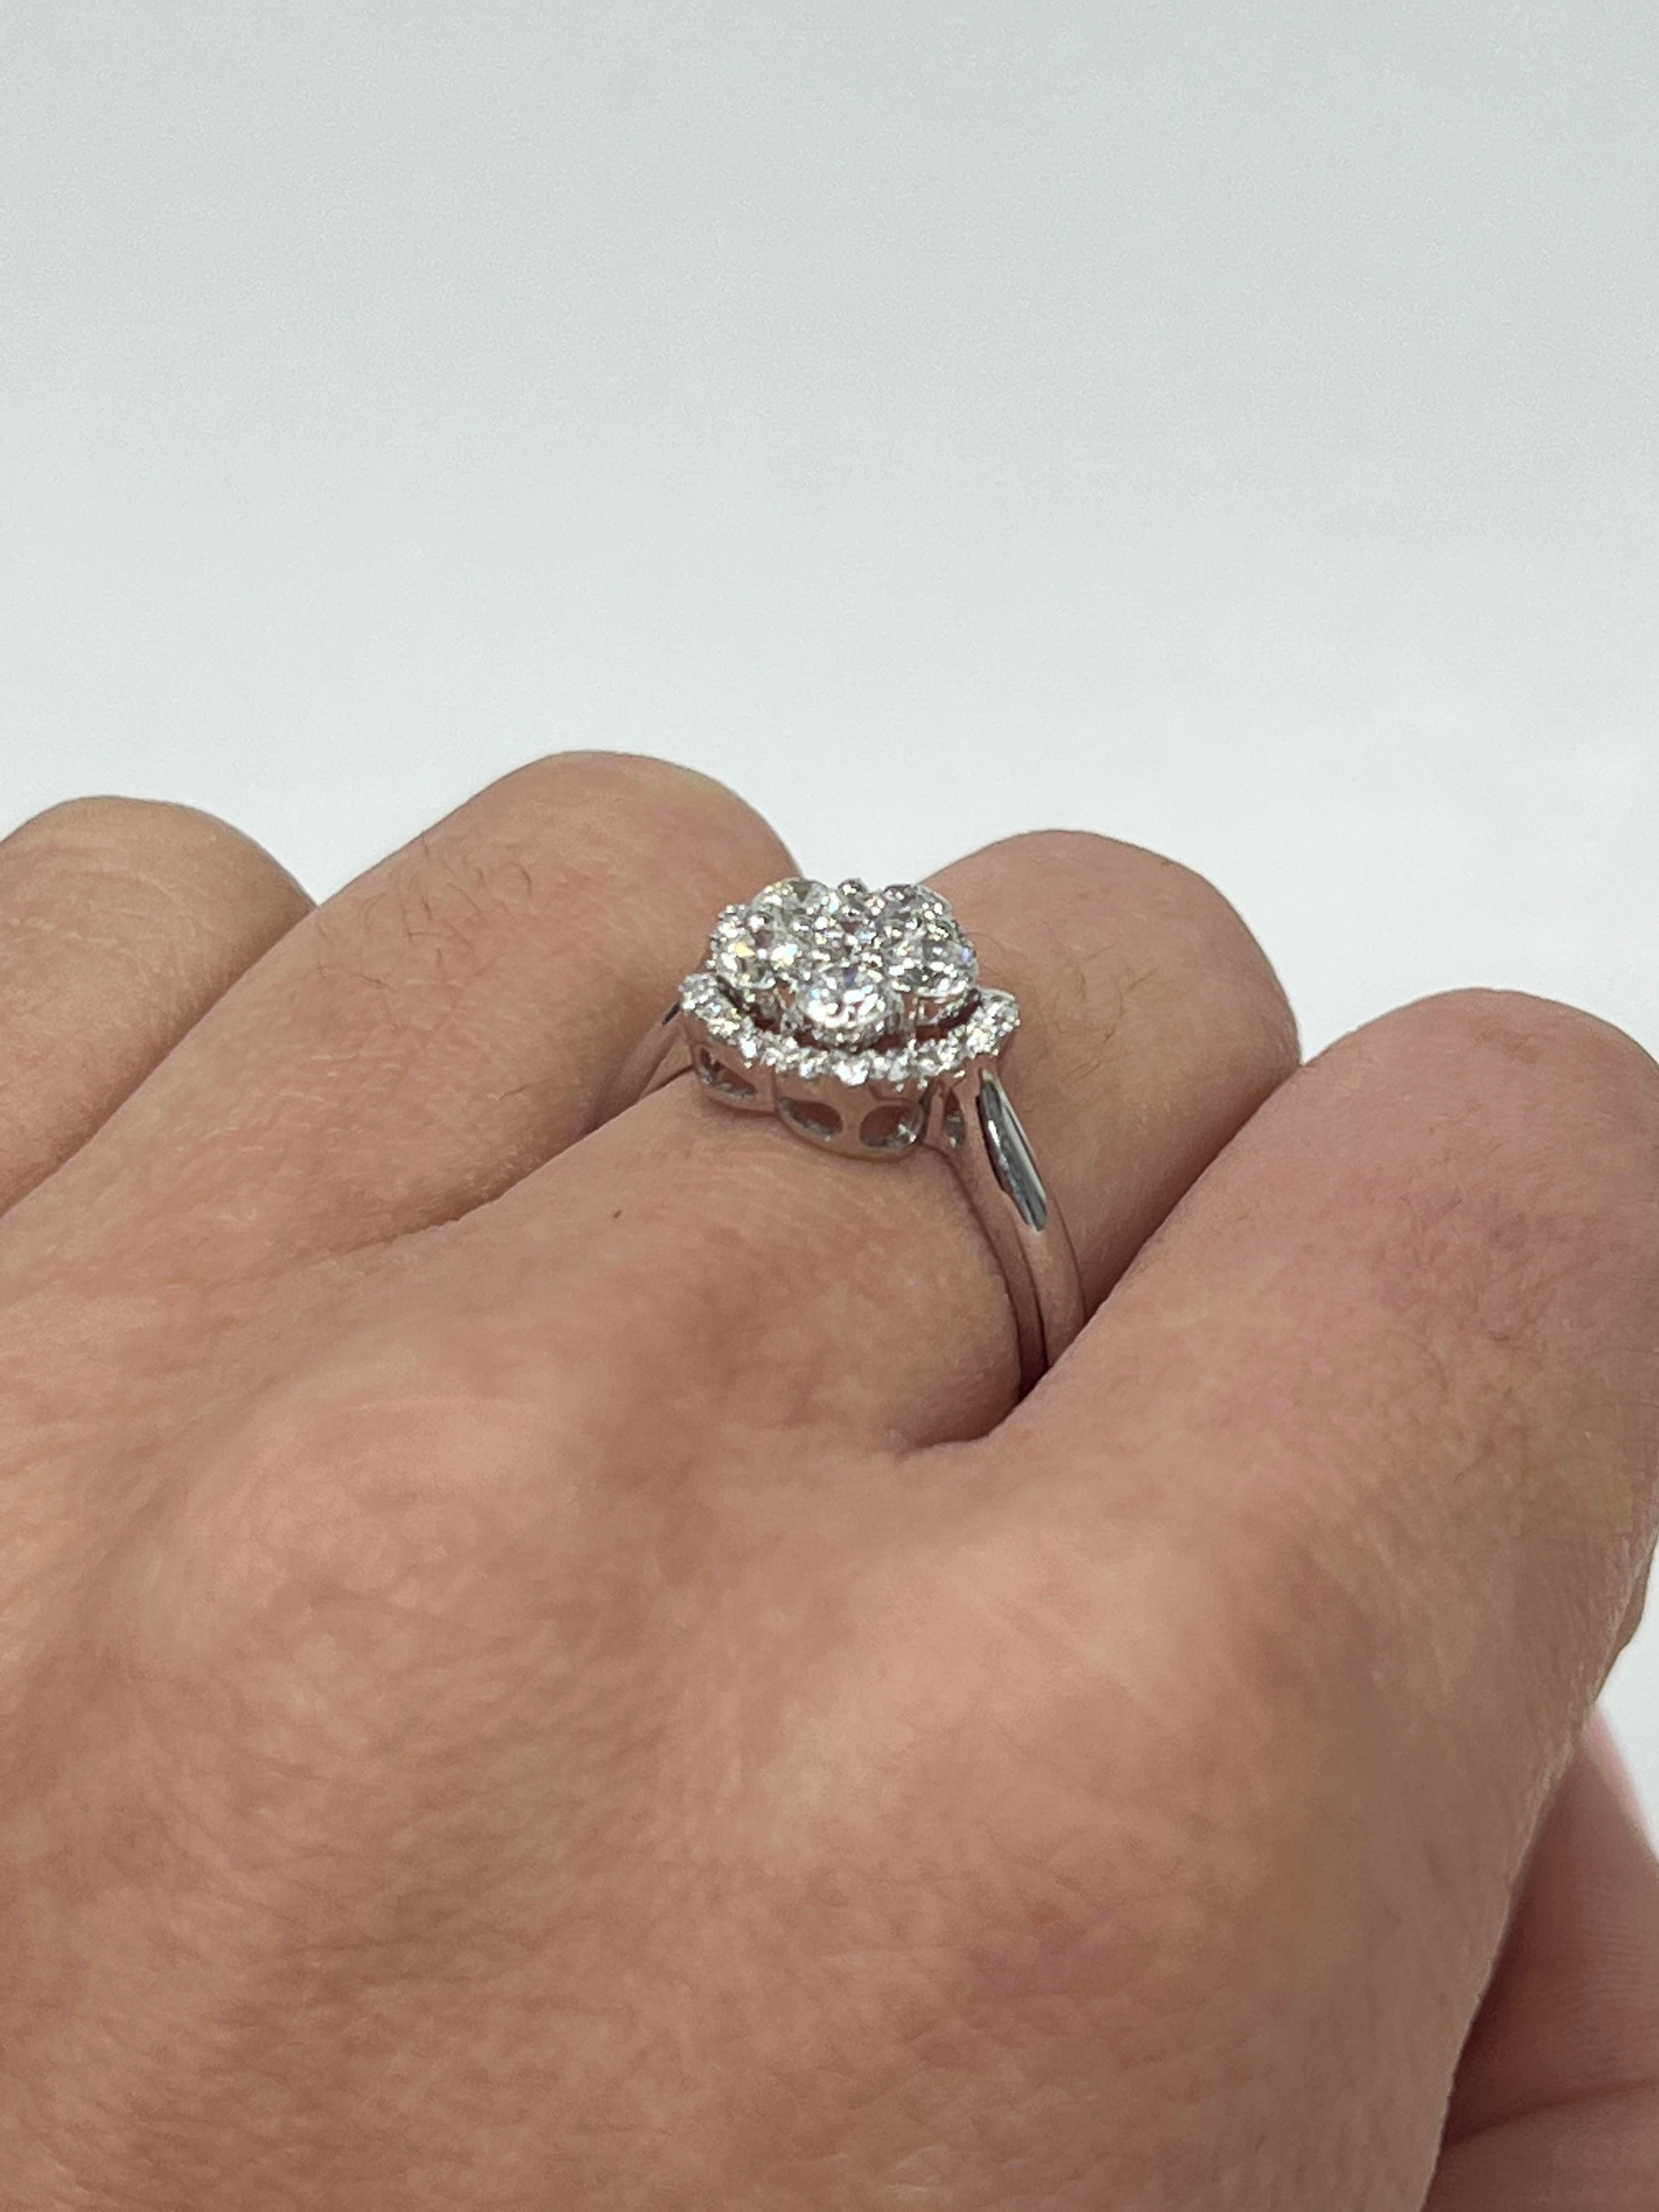 Diamond Flower Ring In New Condition For Sale In Great Neck, NY